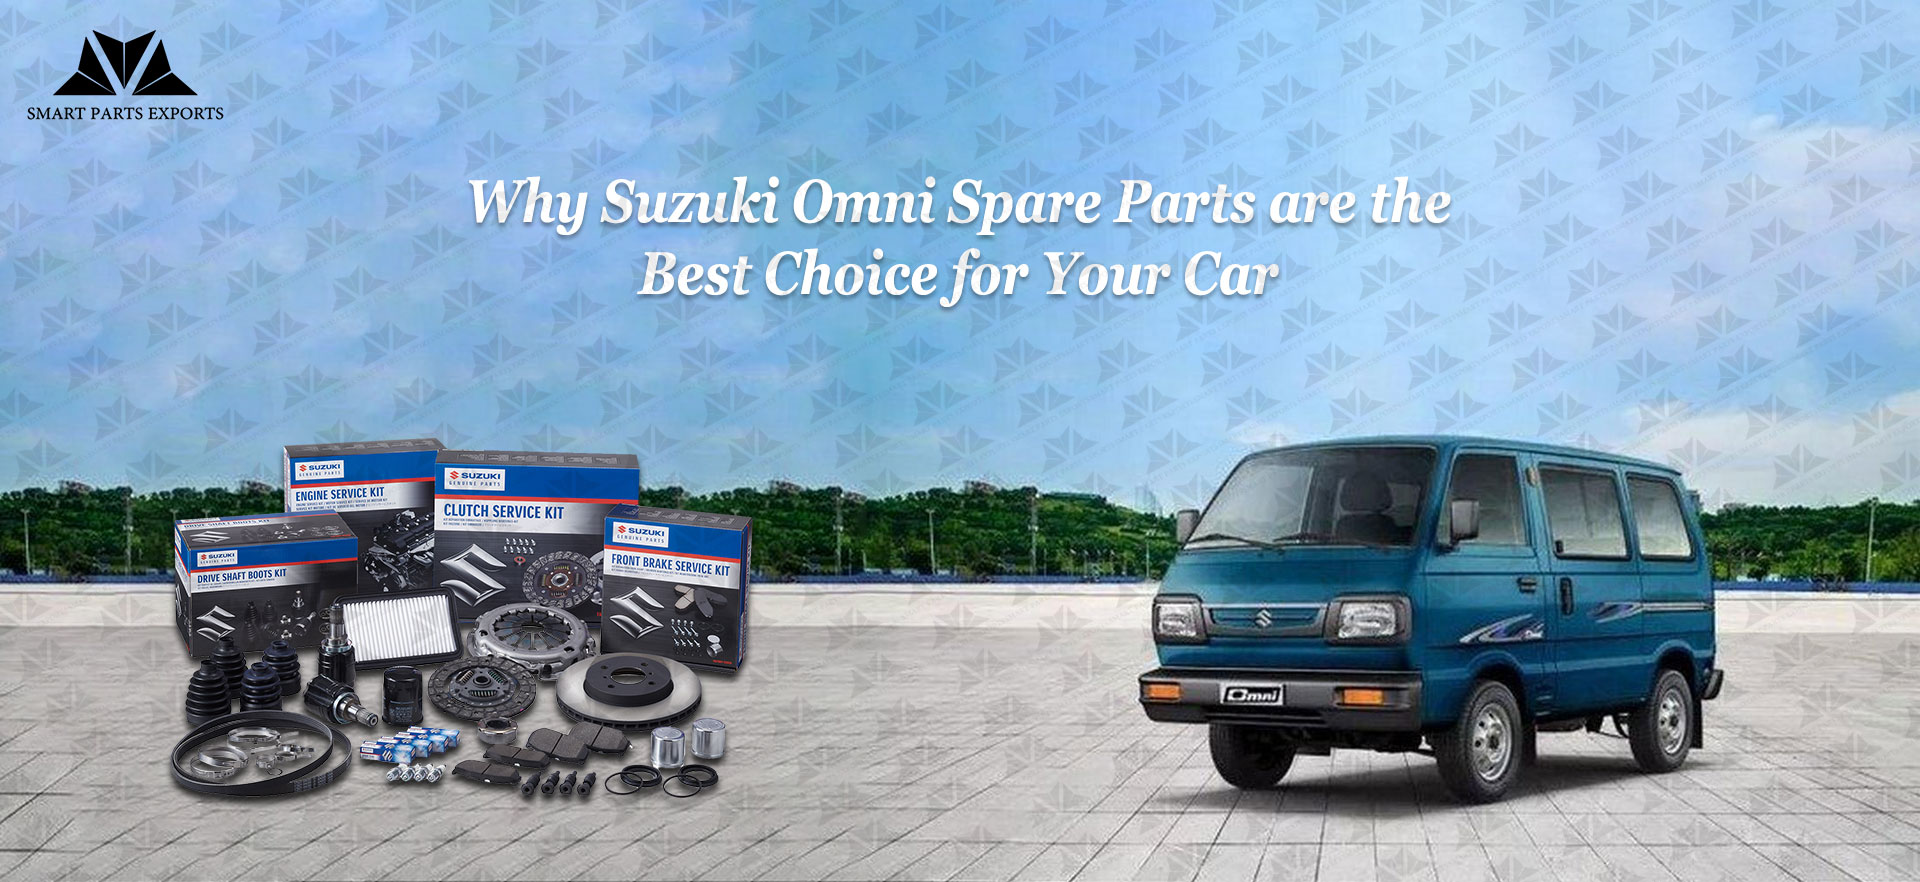 Why Suzuki Omni Spare Parts are the Best Choice for Your Car